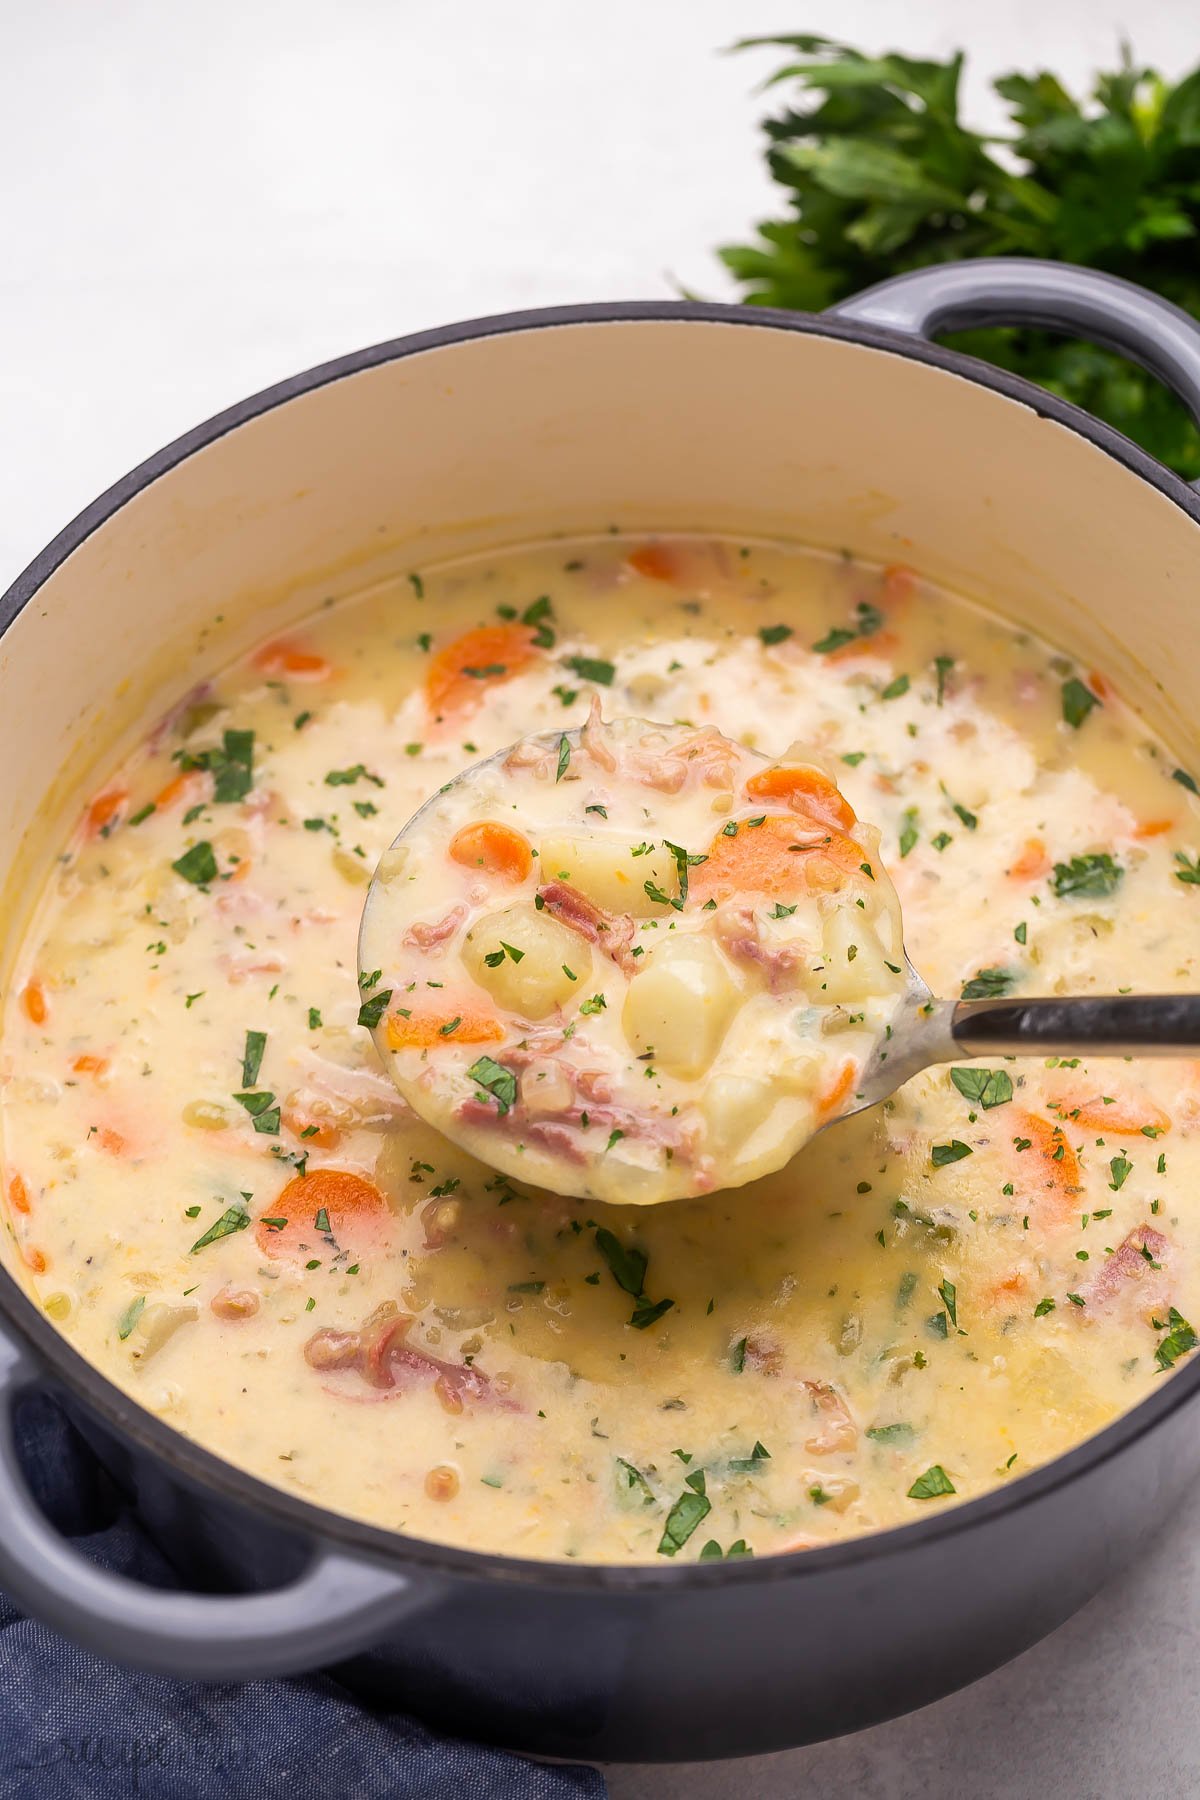 Top view of a big pot filled with ham and potato soup with a ladle in it.